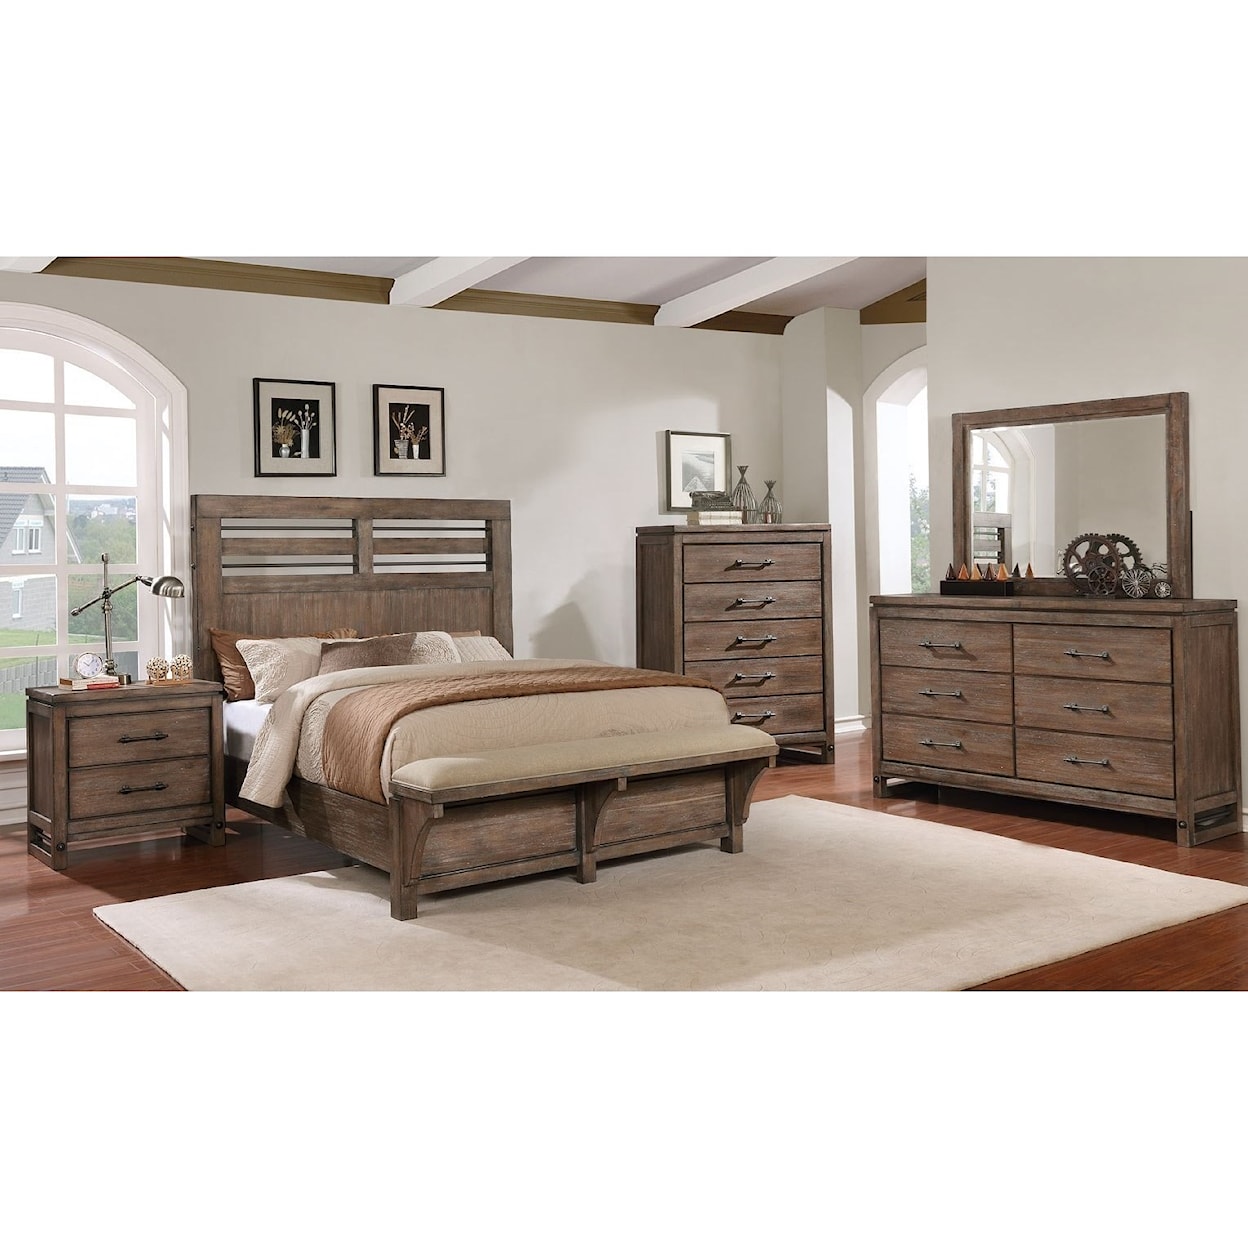 Avalon Furniture Round Rock Queen Bedroom Group